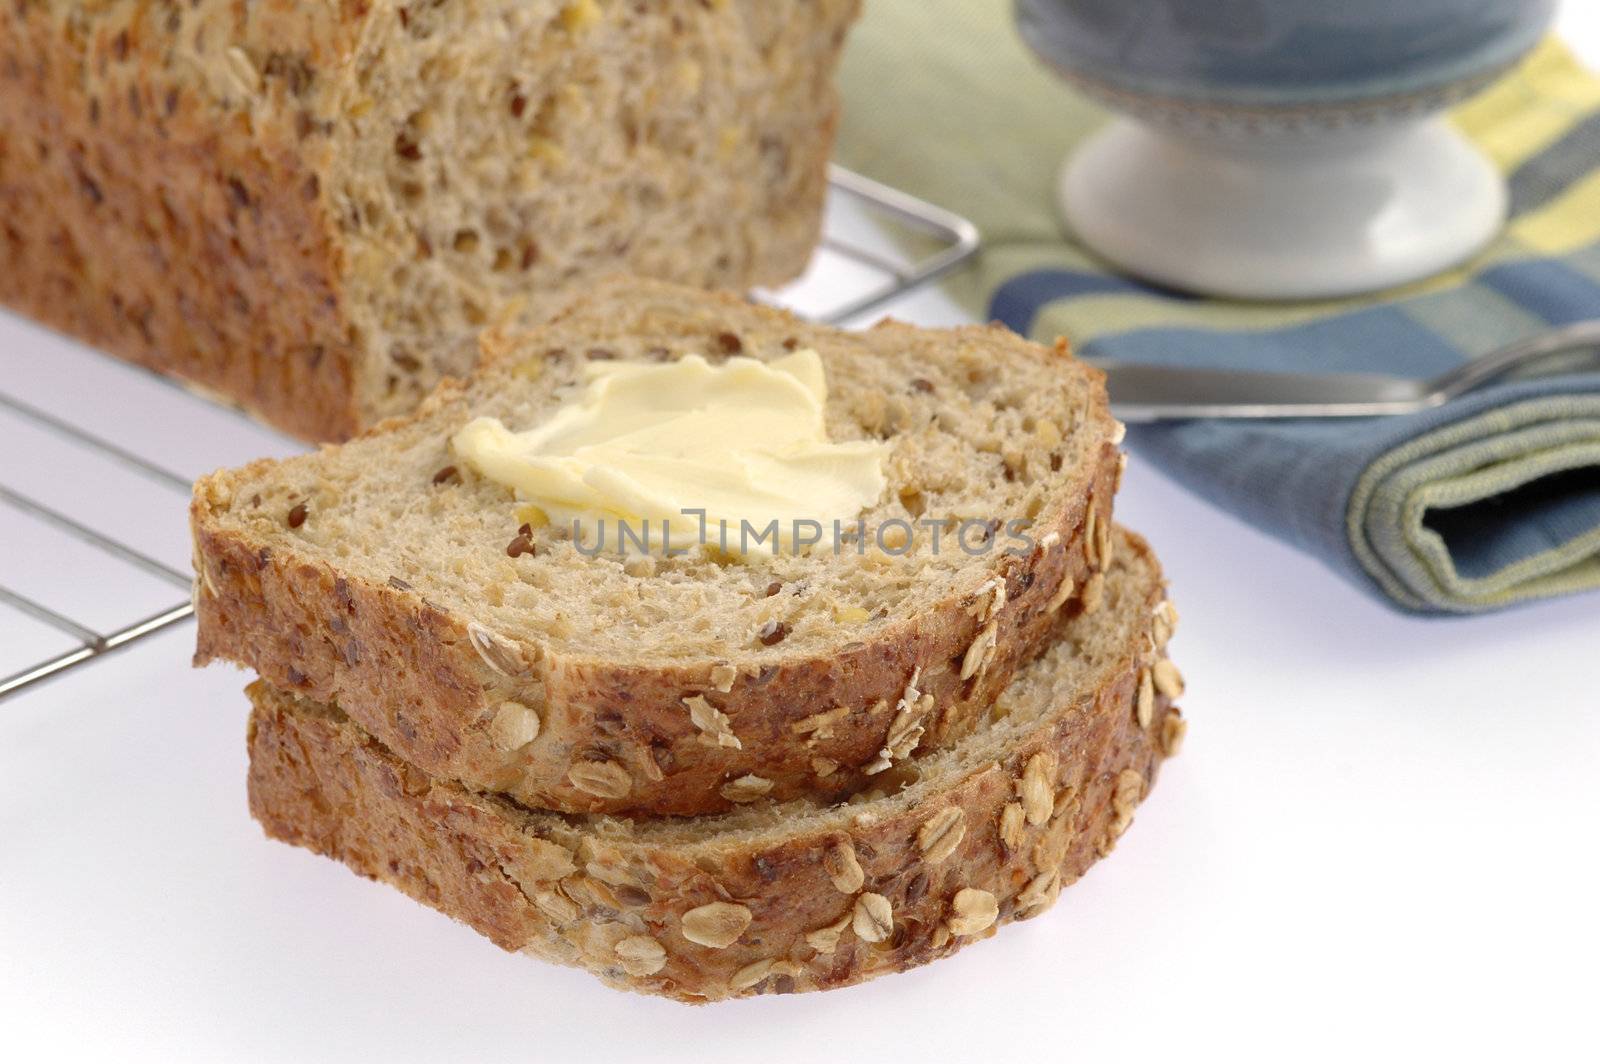 Slices of homemade hearty bread with butter.